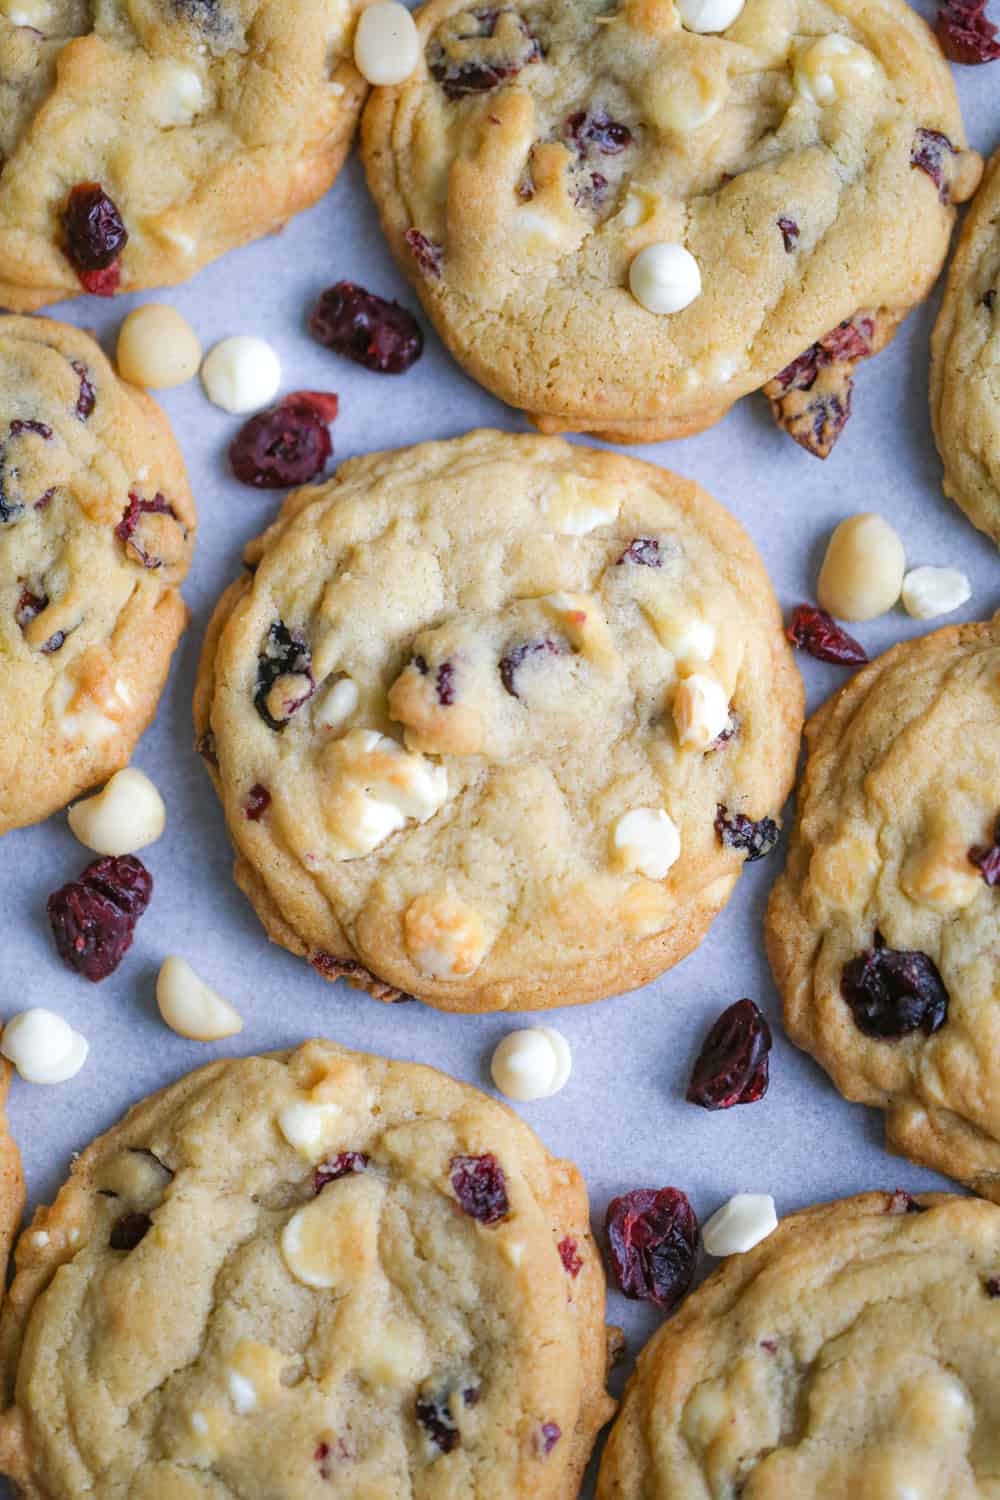 Best-Ever White Chocolate Cranberry Cookies recipe cranberries